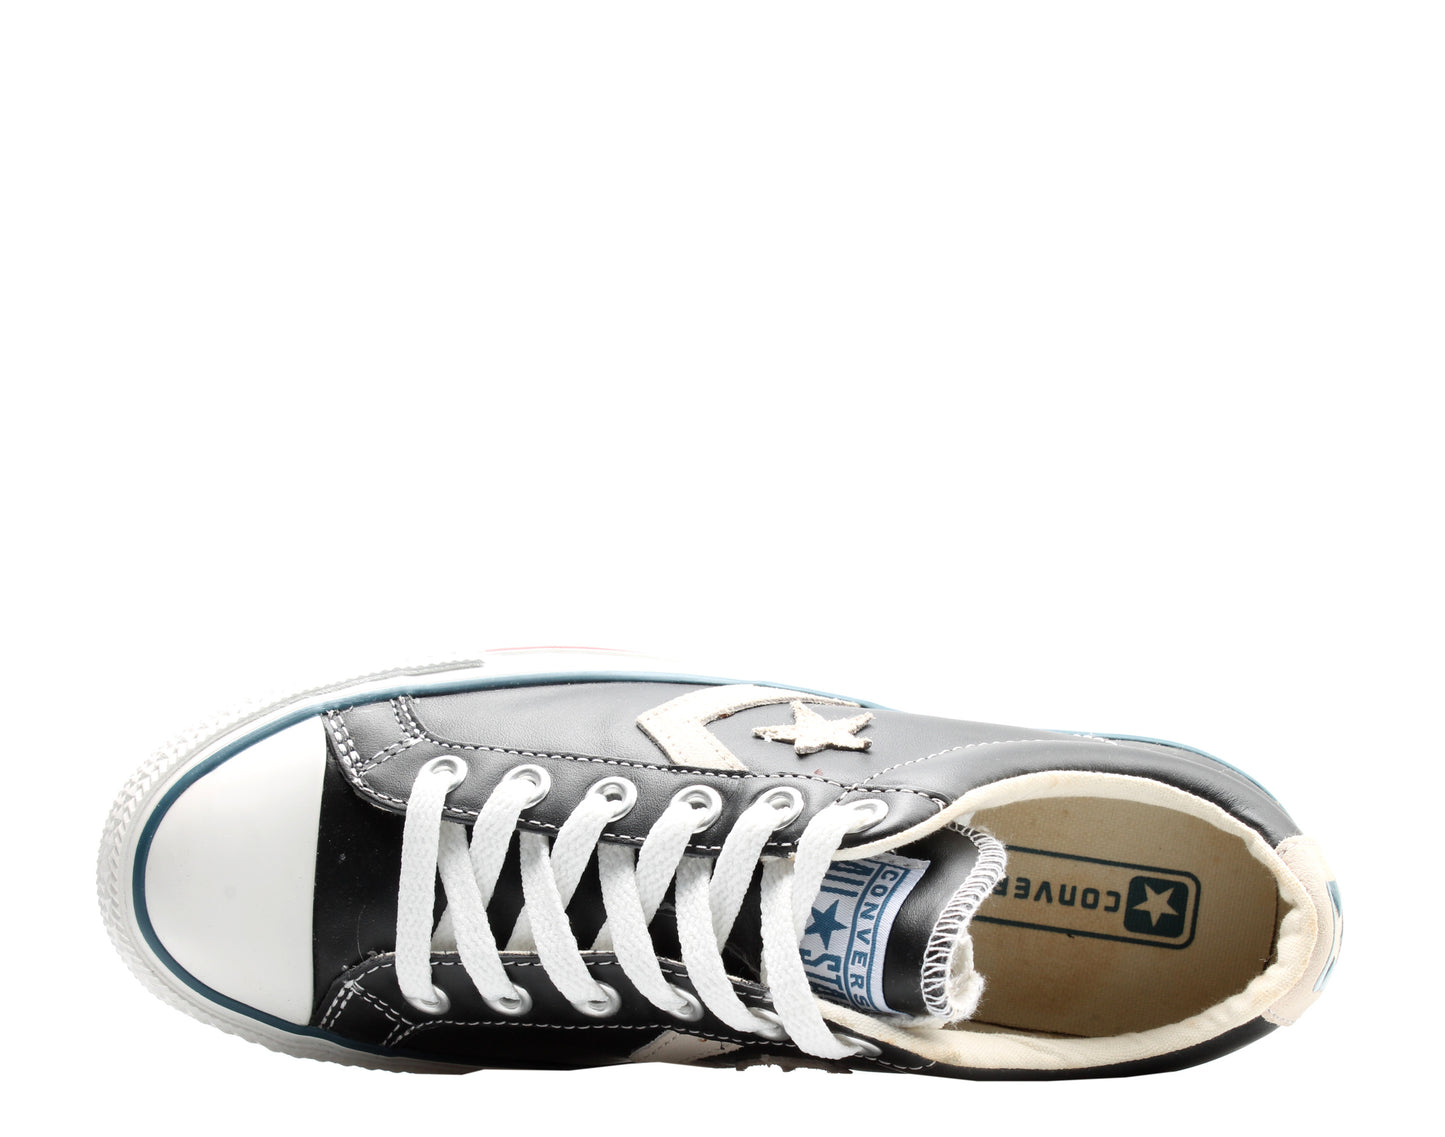 Converse Chuck Taylor Star Player Evolution Ox Low Top Sneakers